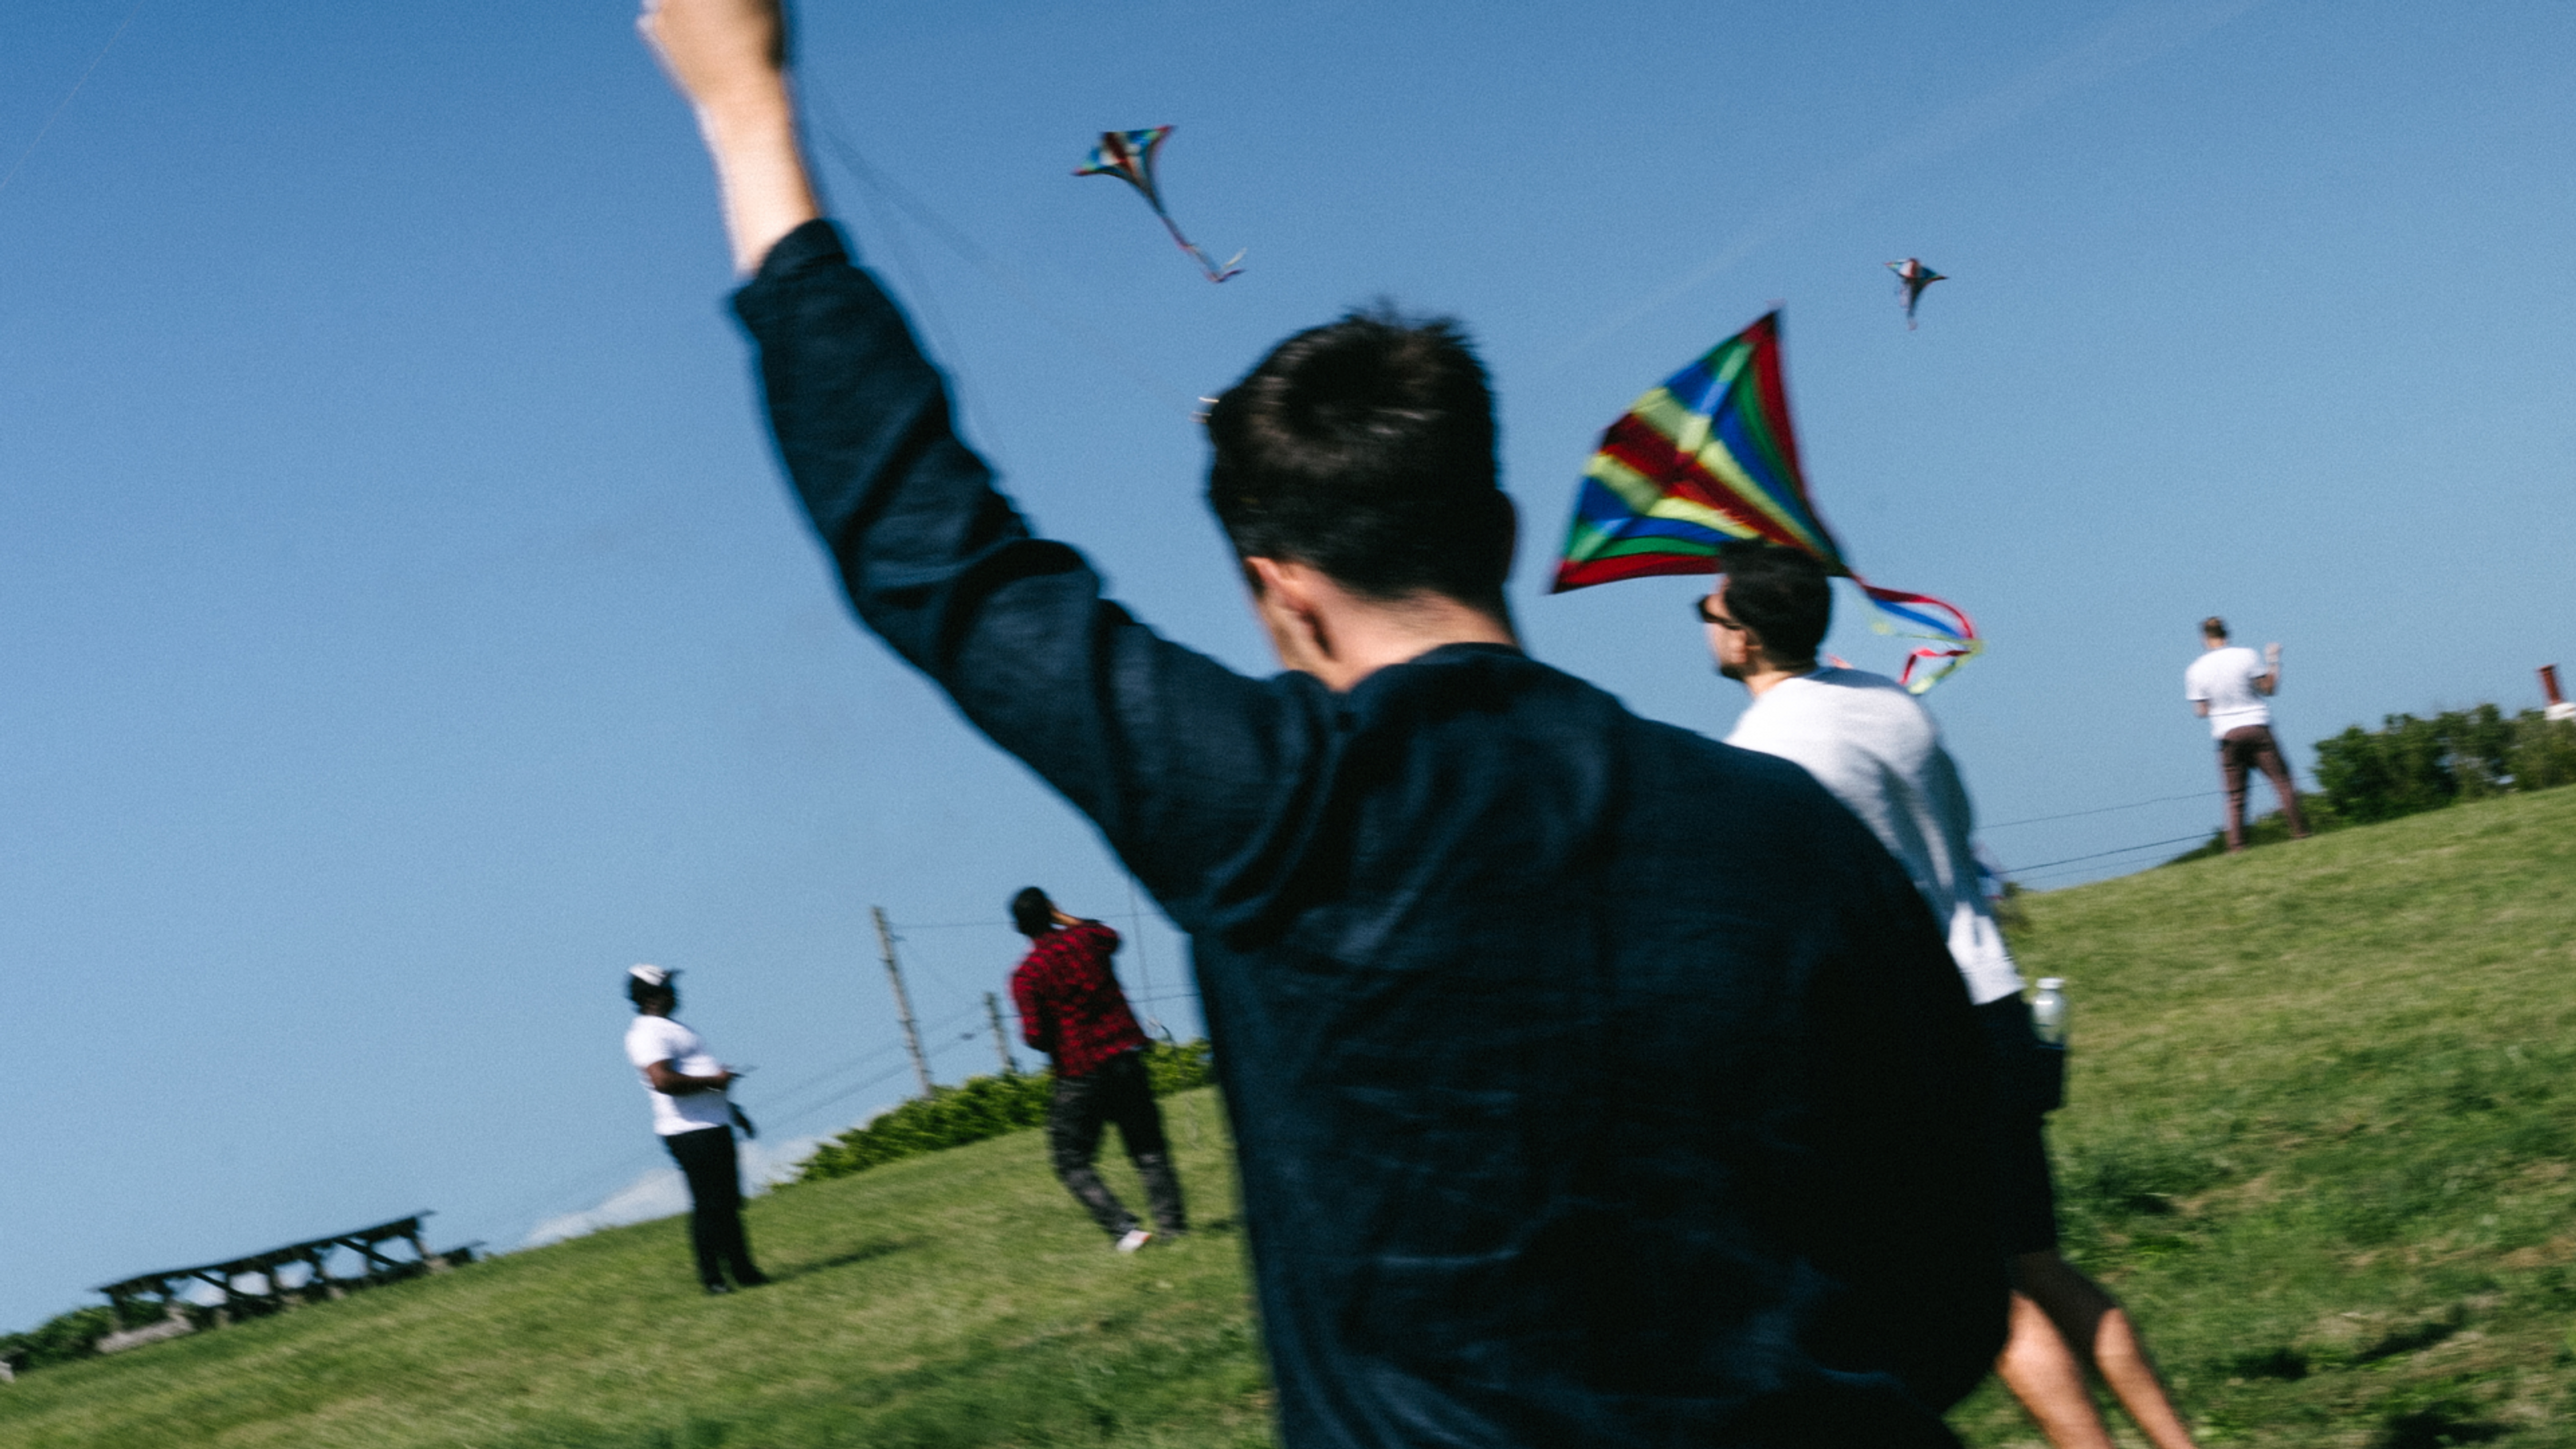 A group of young people flying kites